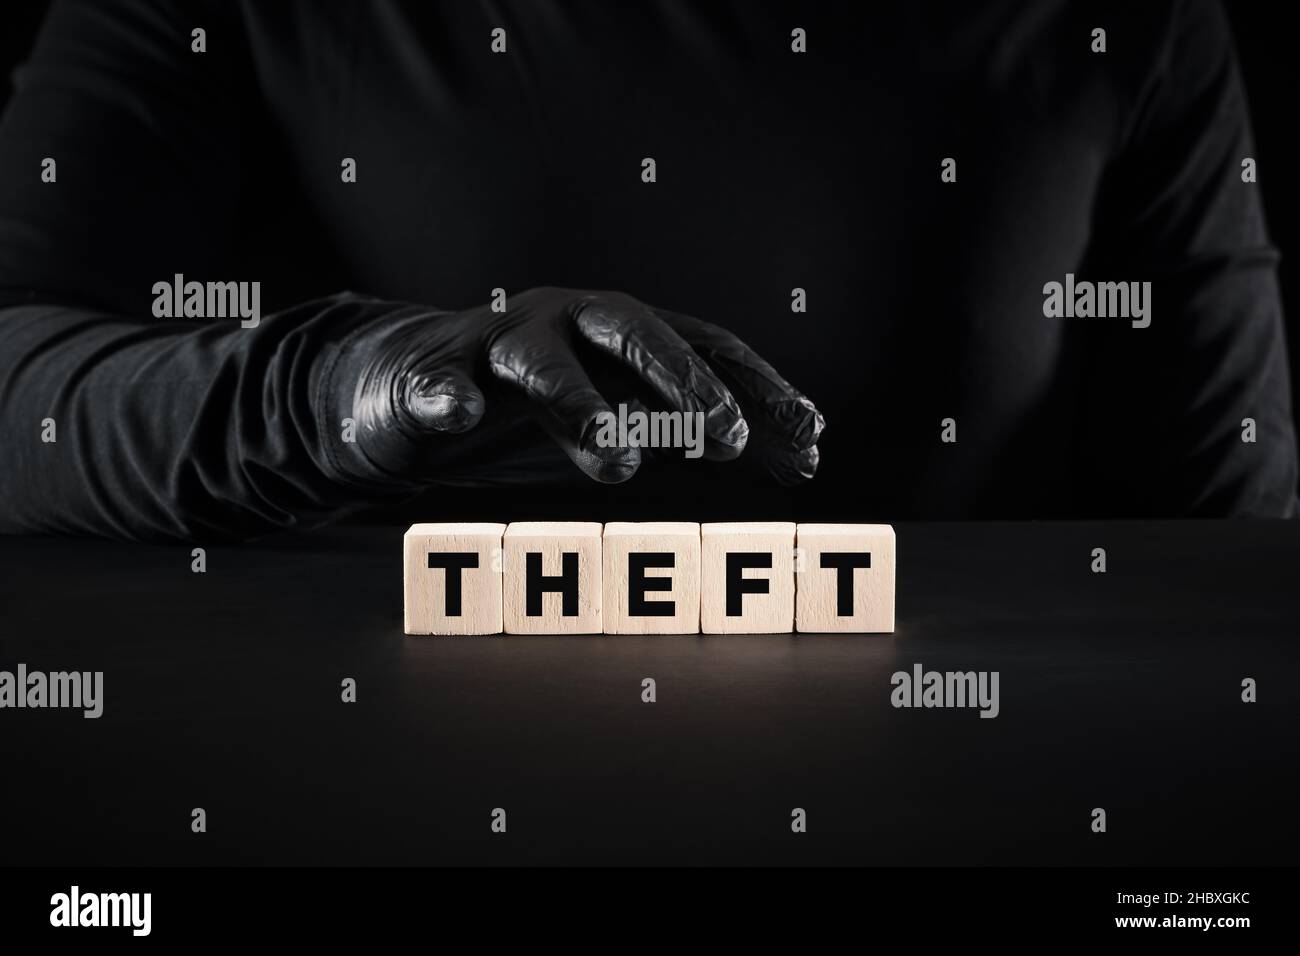 Theft, crime, burglary or stealing concept. Criminal hand wearing black gloves is over the wooden blocks with the word theft. Stock Photo